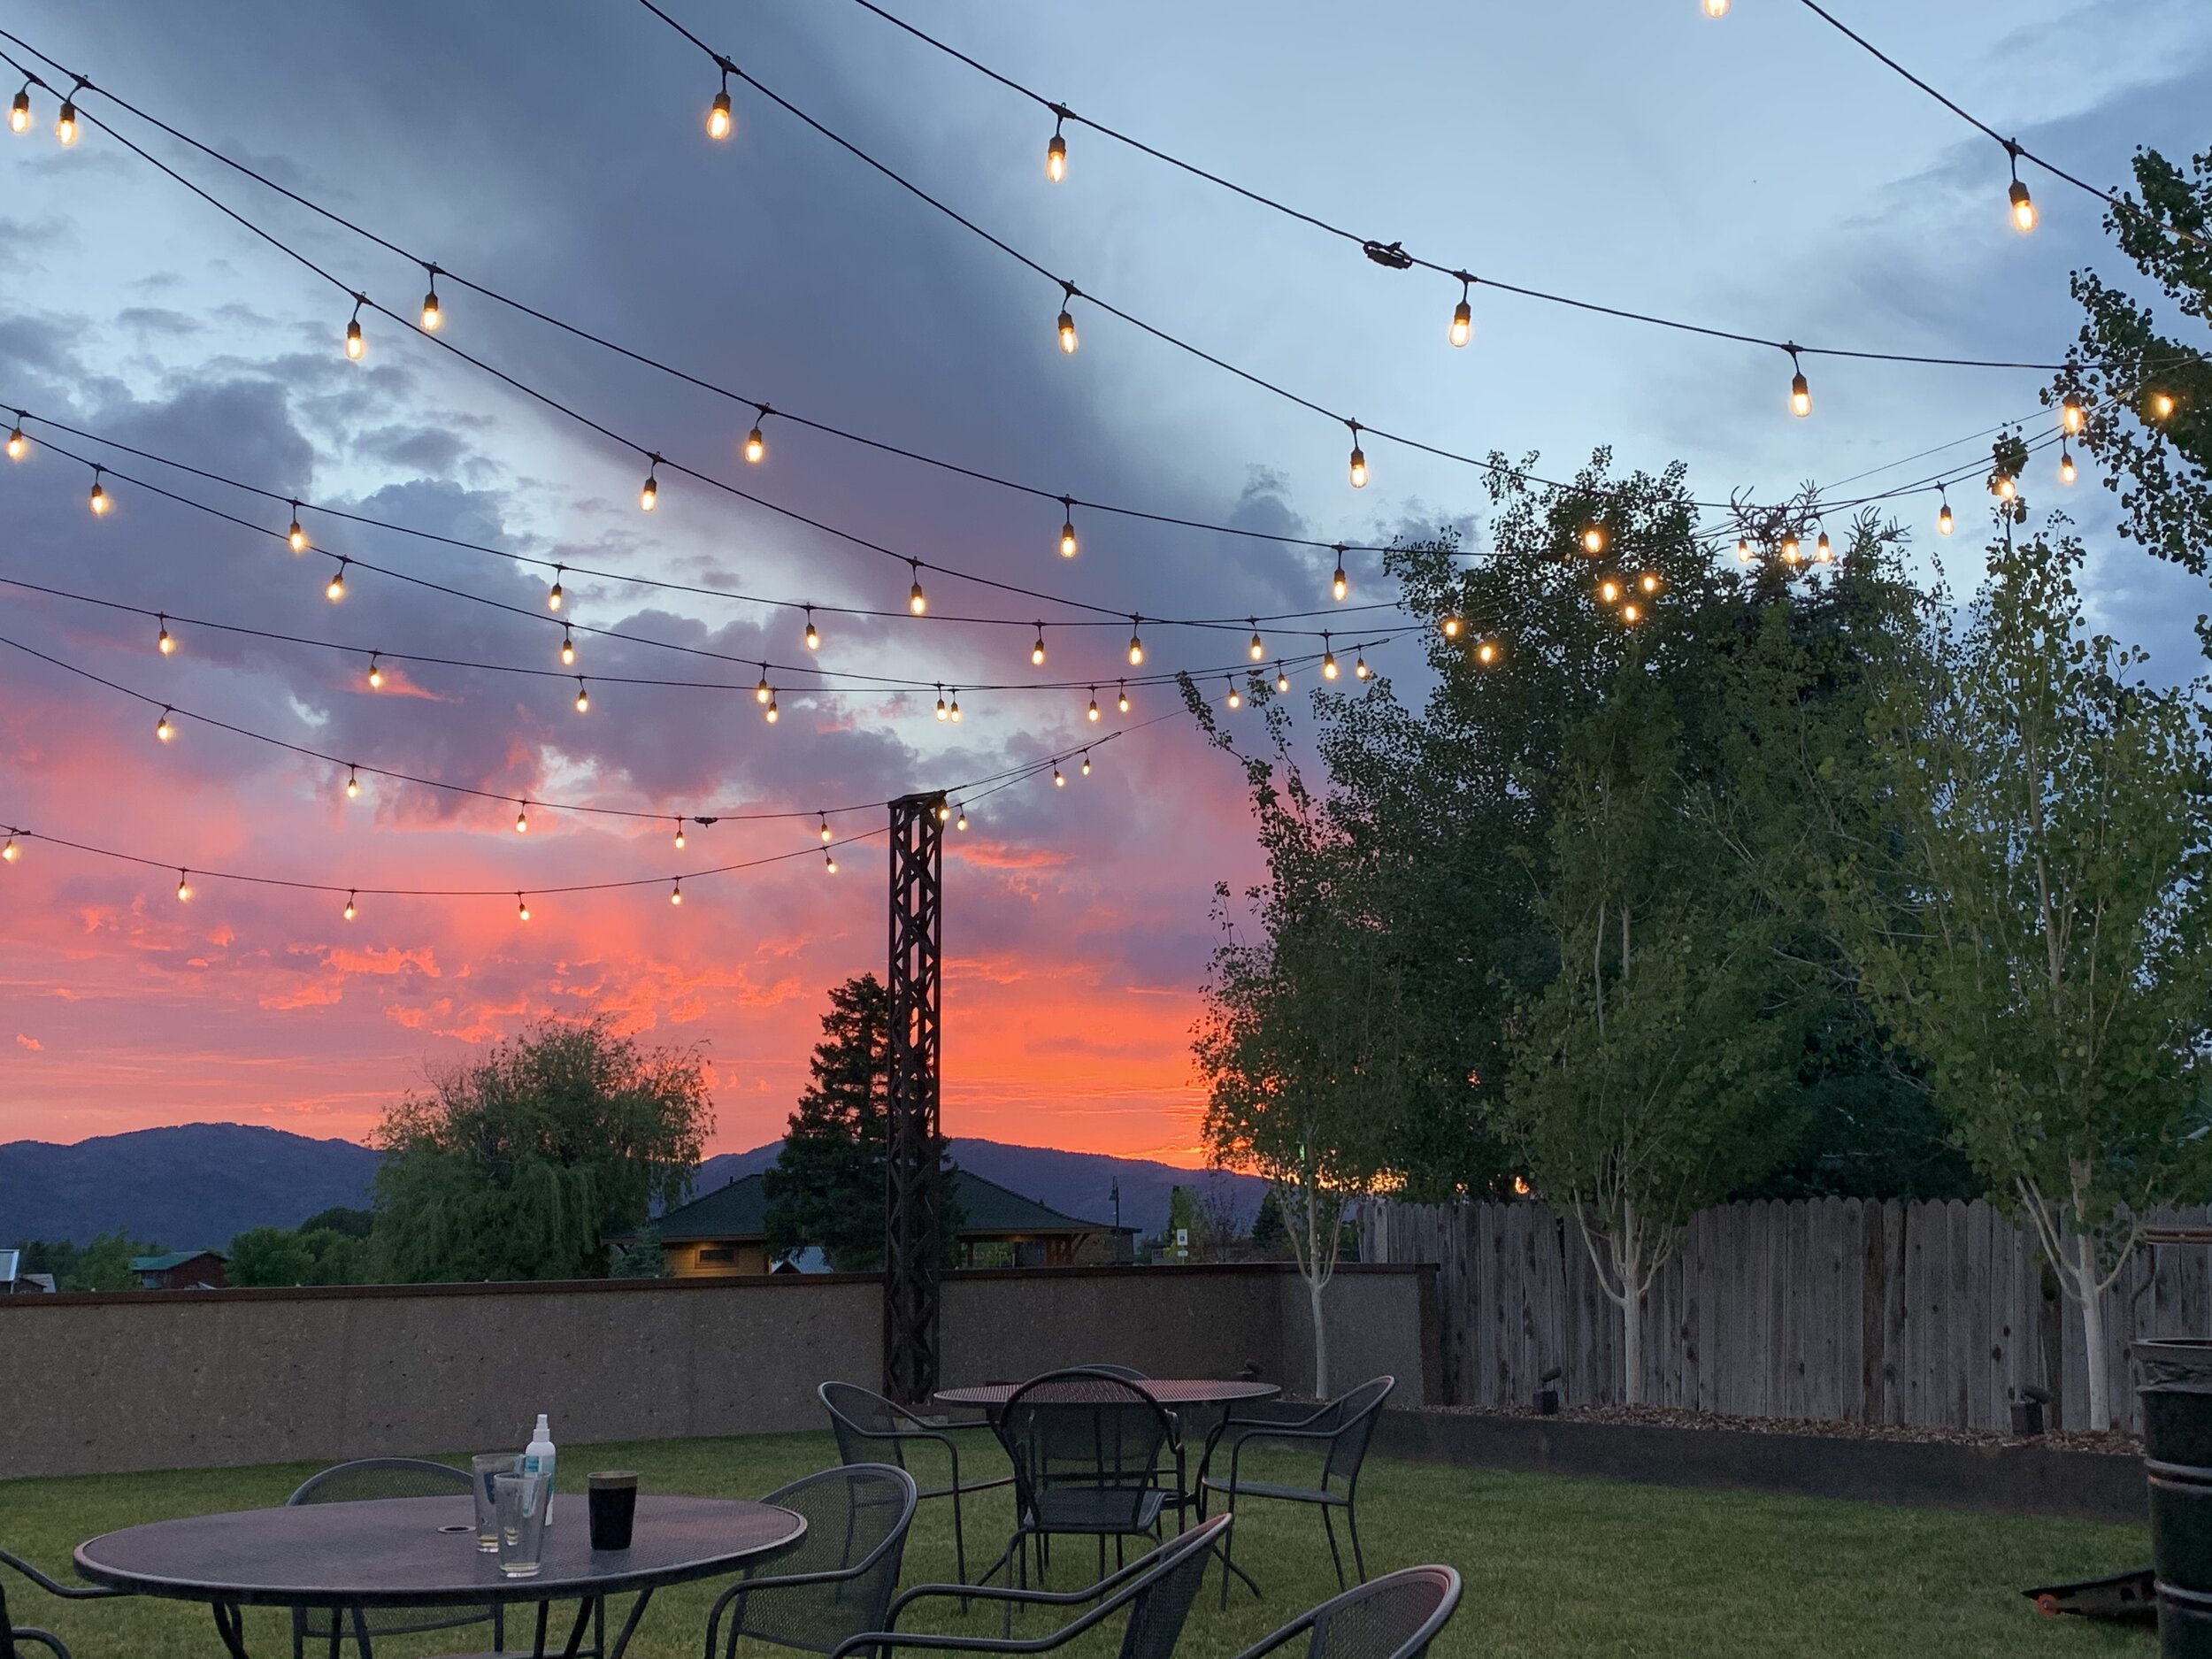  After a full day in Yellowstone and Grand Tetons National Parks, we found this treasure in Victor, ID. A great place for dinner and an incredible sunset to boot!  